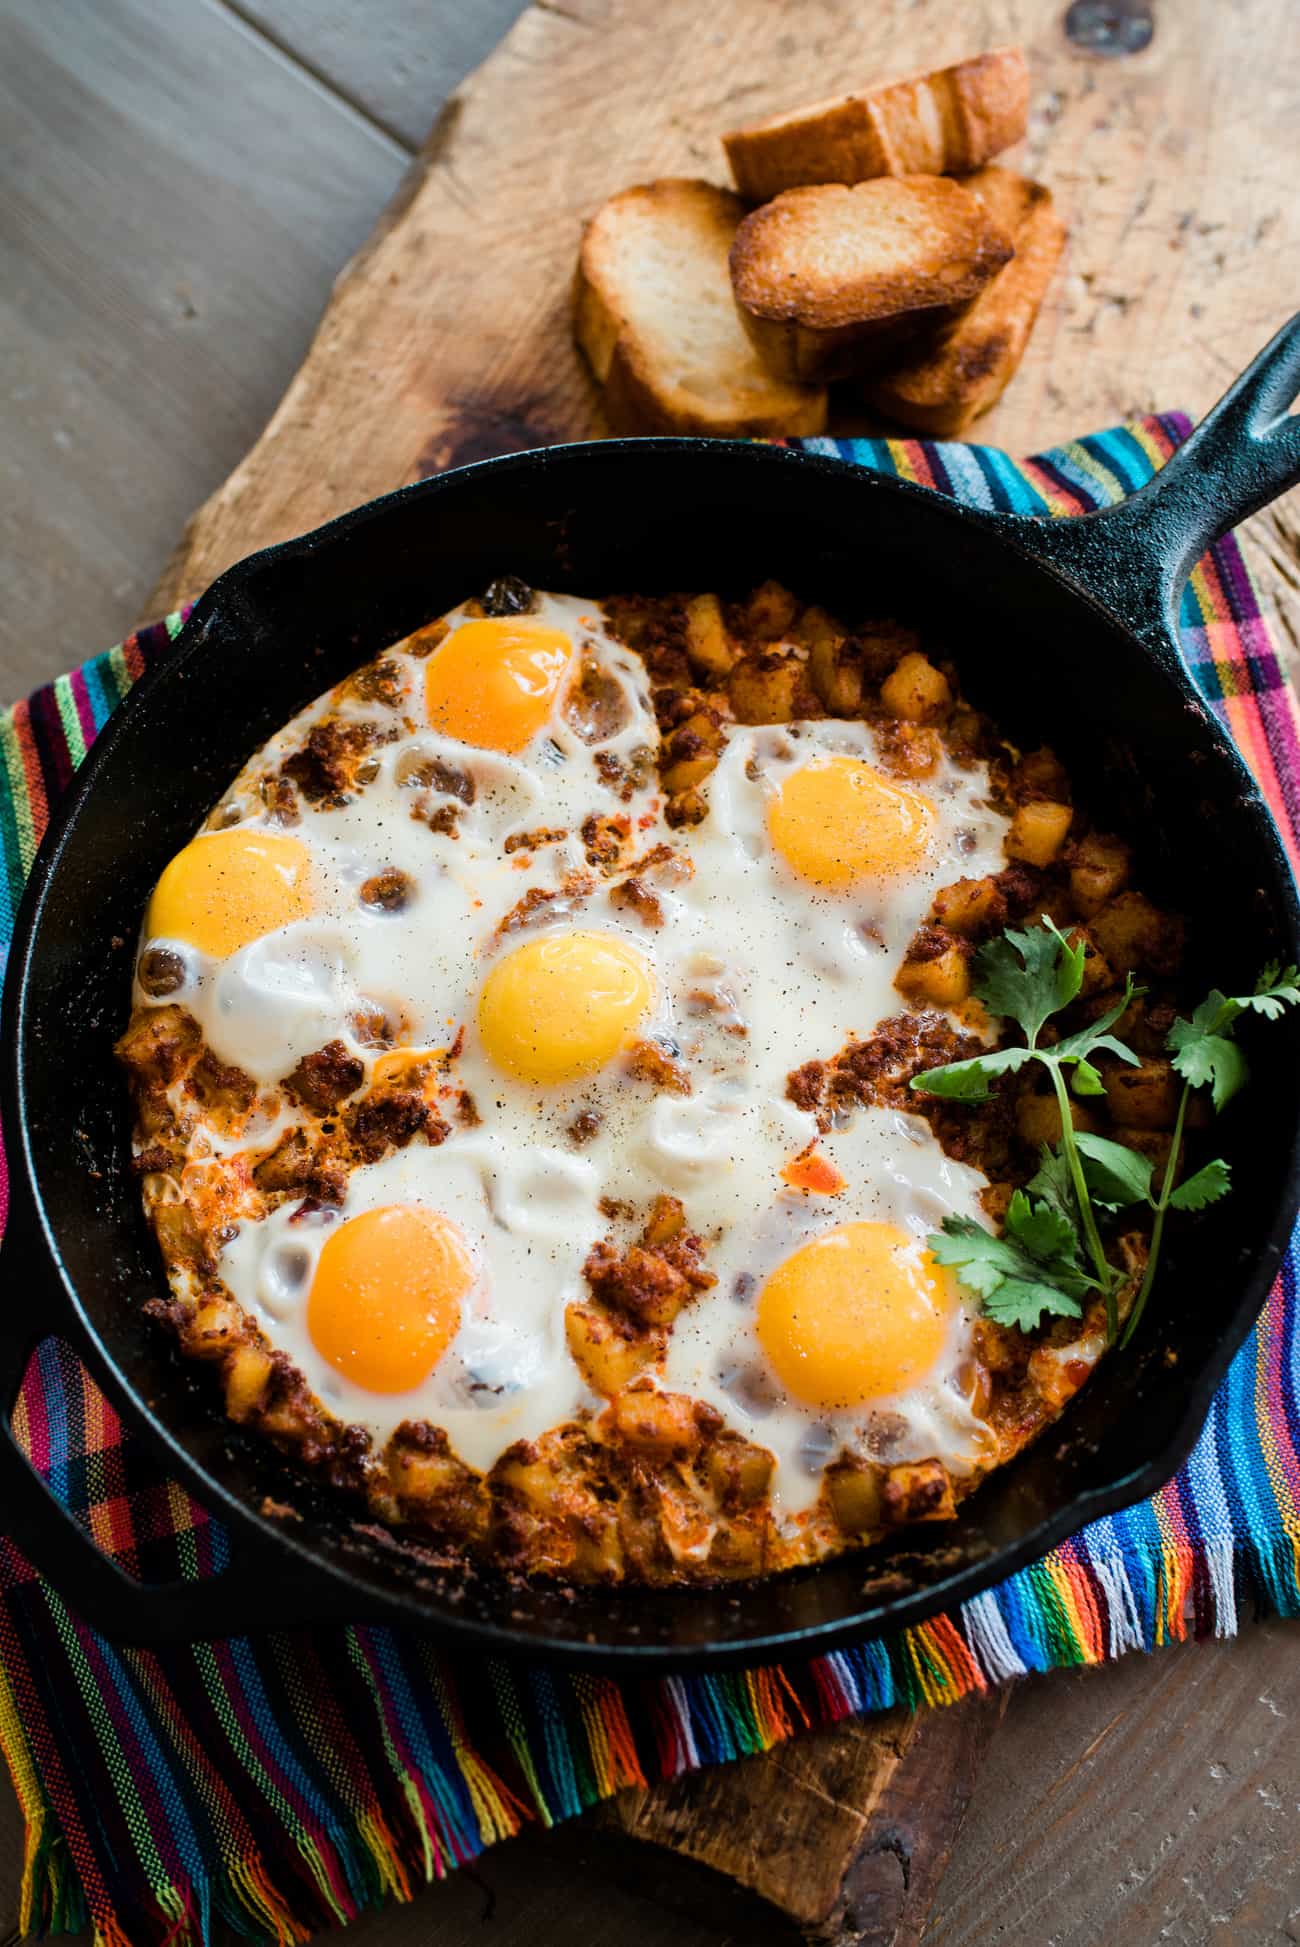 Baked Eggs with Chorizo and Potatoes in an iron skillet on a colorful striped linen.